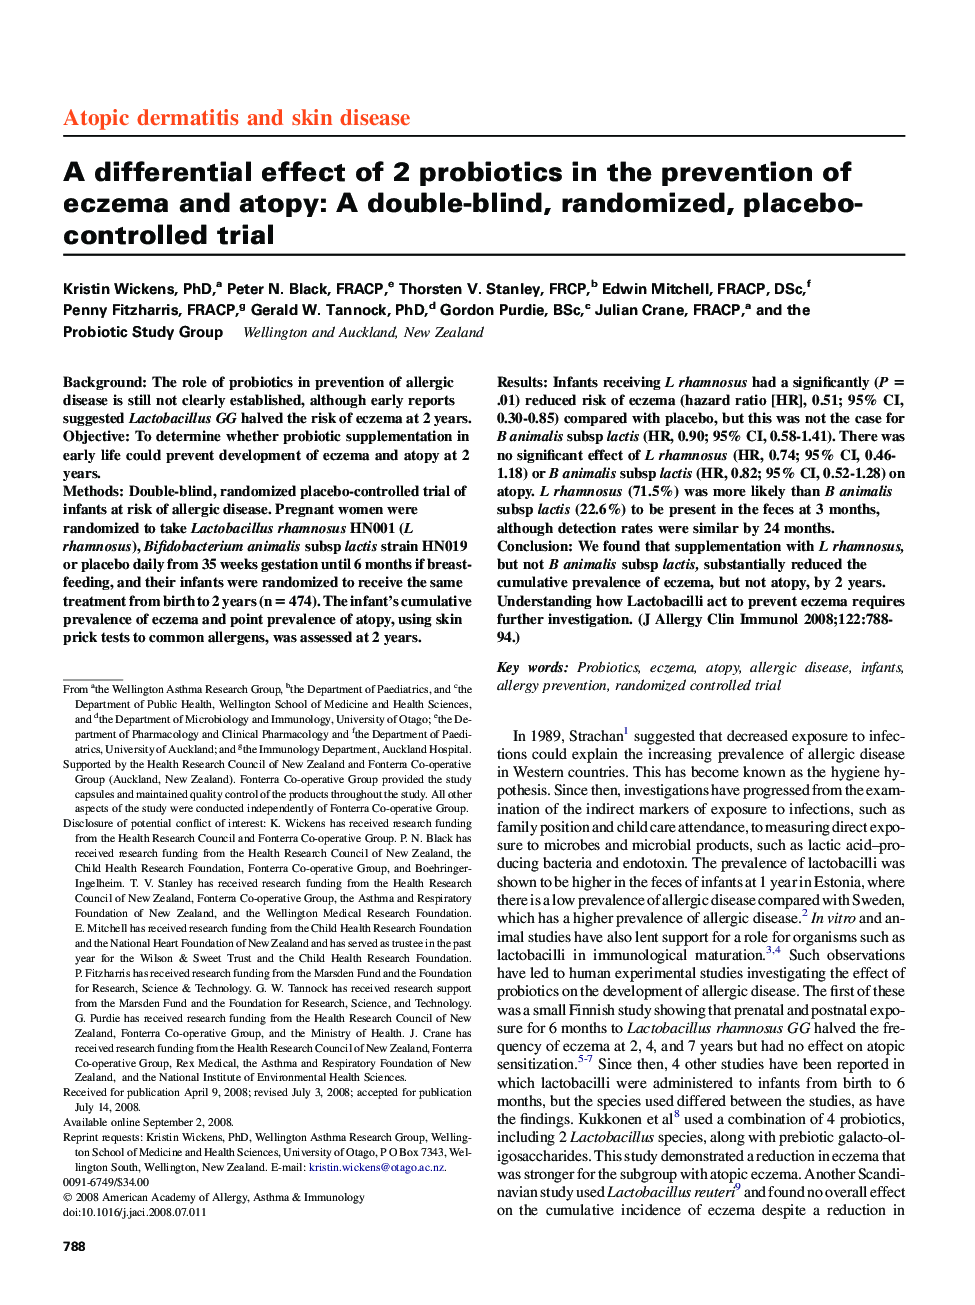 A differential effect of 2 probiotics in the prevention of eczema and atopy: A double-blind, randomized, placebo-controlled trial 